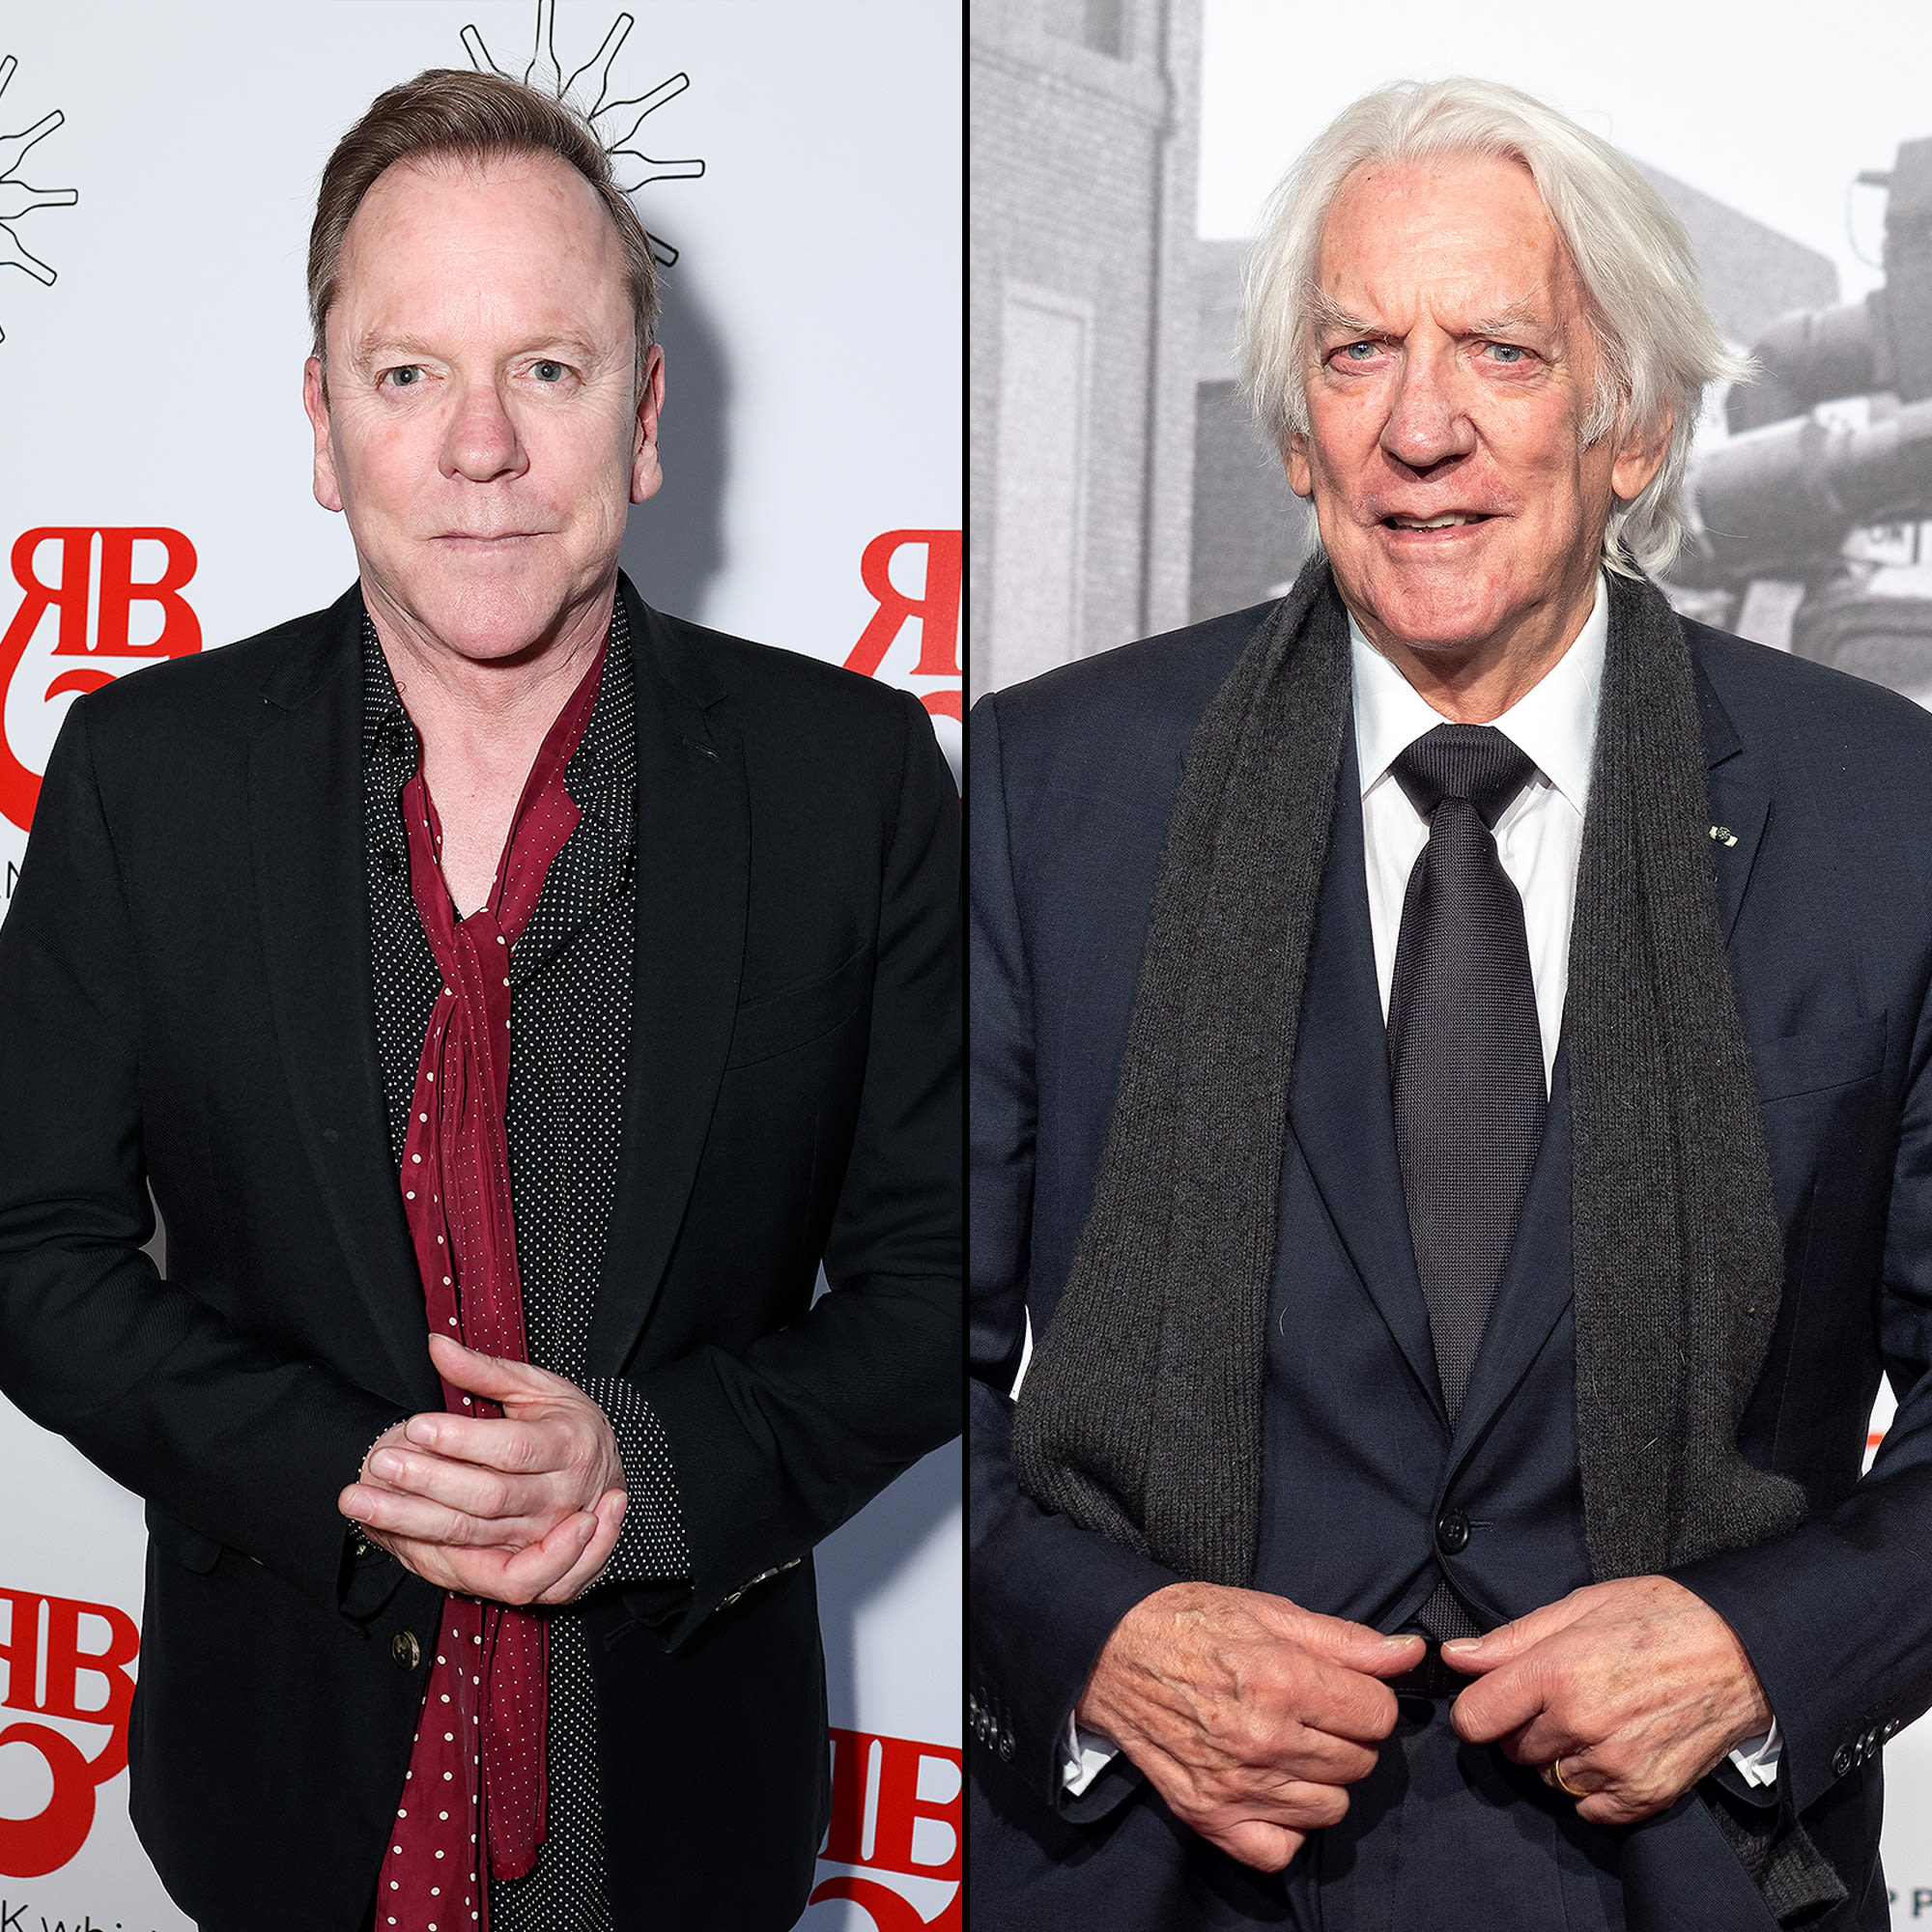 Kiefer Sutherland Explains Why He Didn’t Get to Know Late Father Donald Until He ‘Left Home at 15’